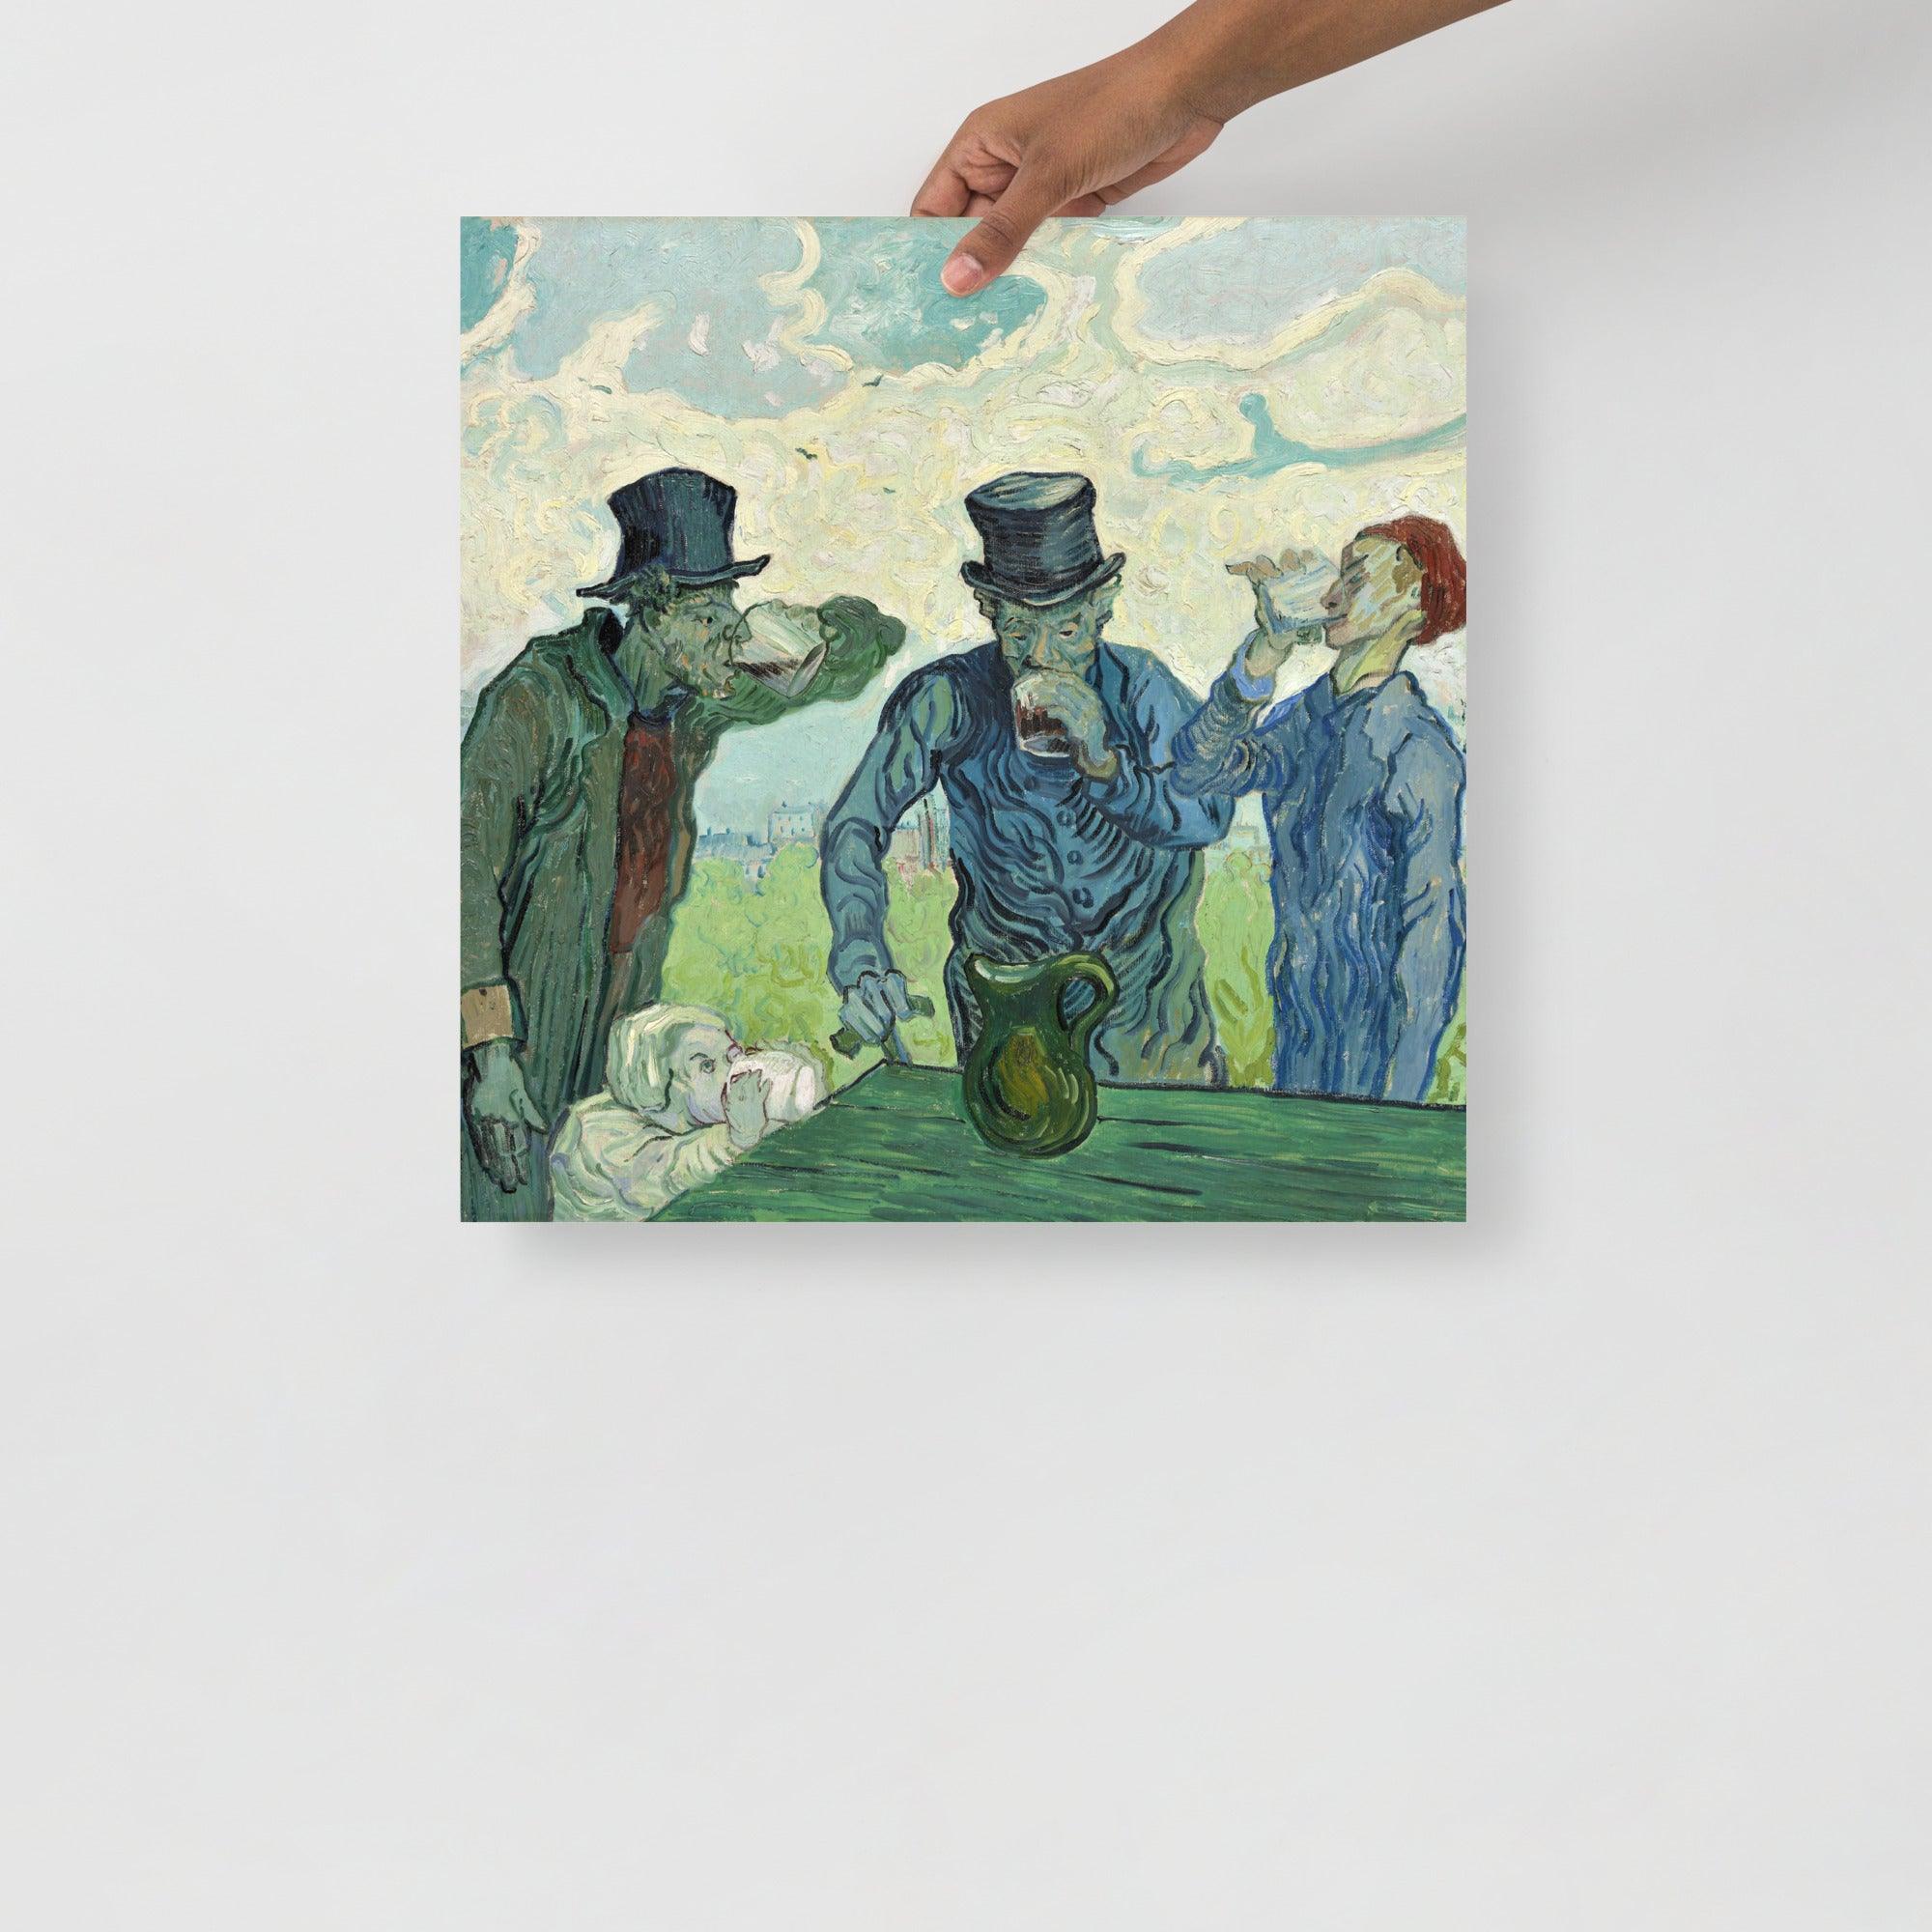 The Drinkers by Vincent Van Gogh poster on a plain backdrop in size 18x18”.